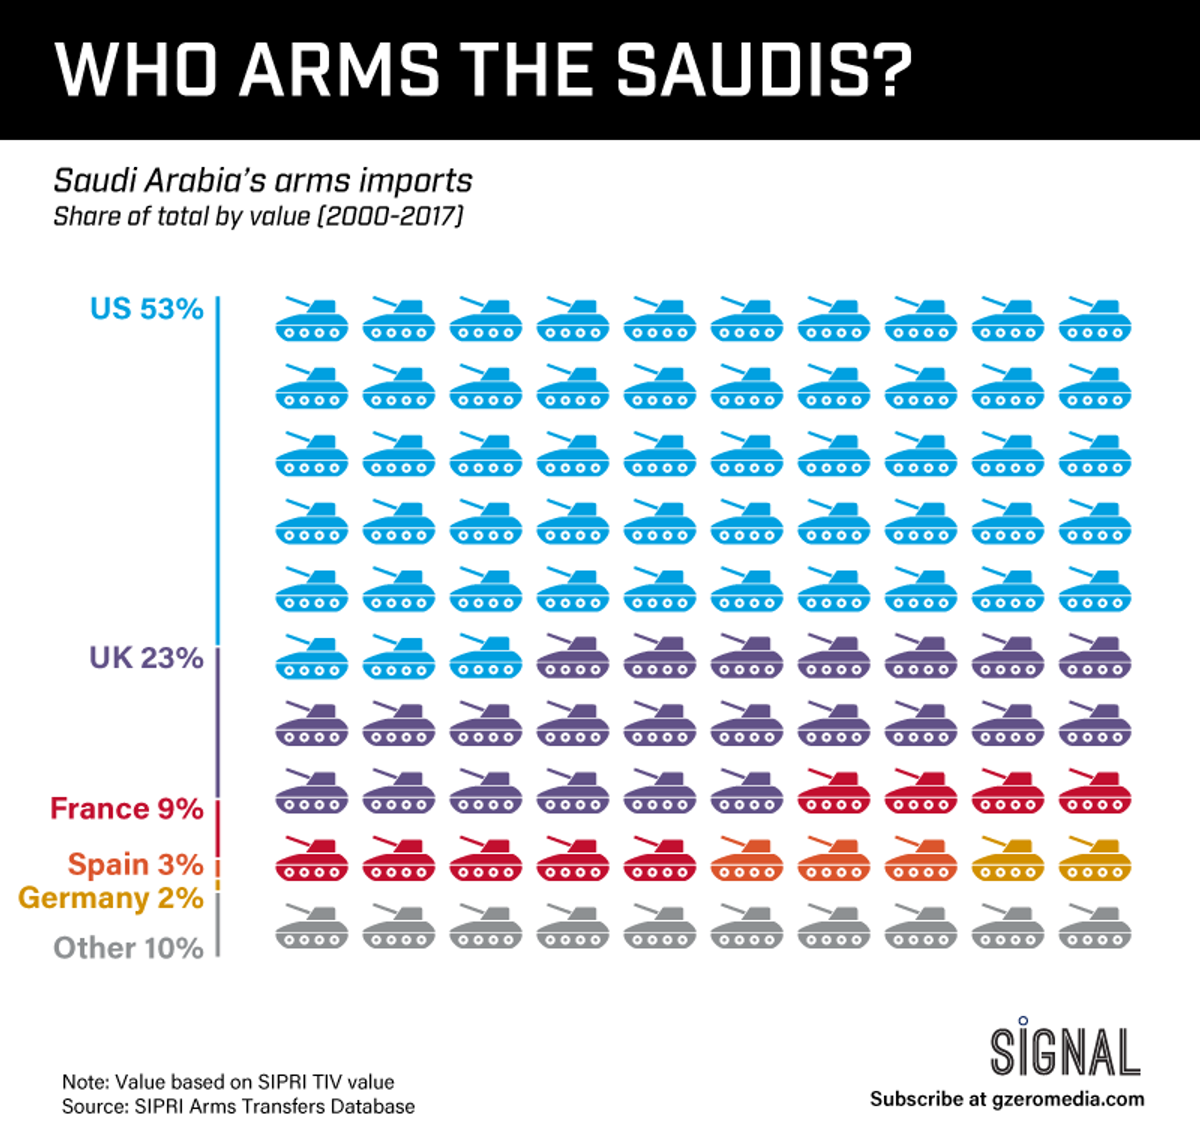 GRAPHIC TRUTH: WHO ARMS THE SAUDIS?